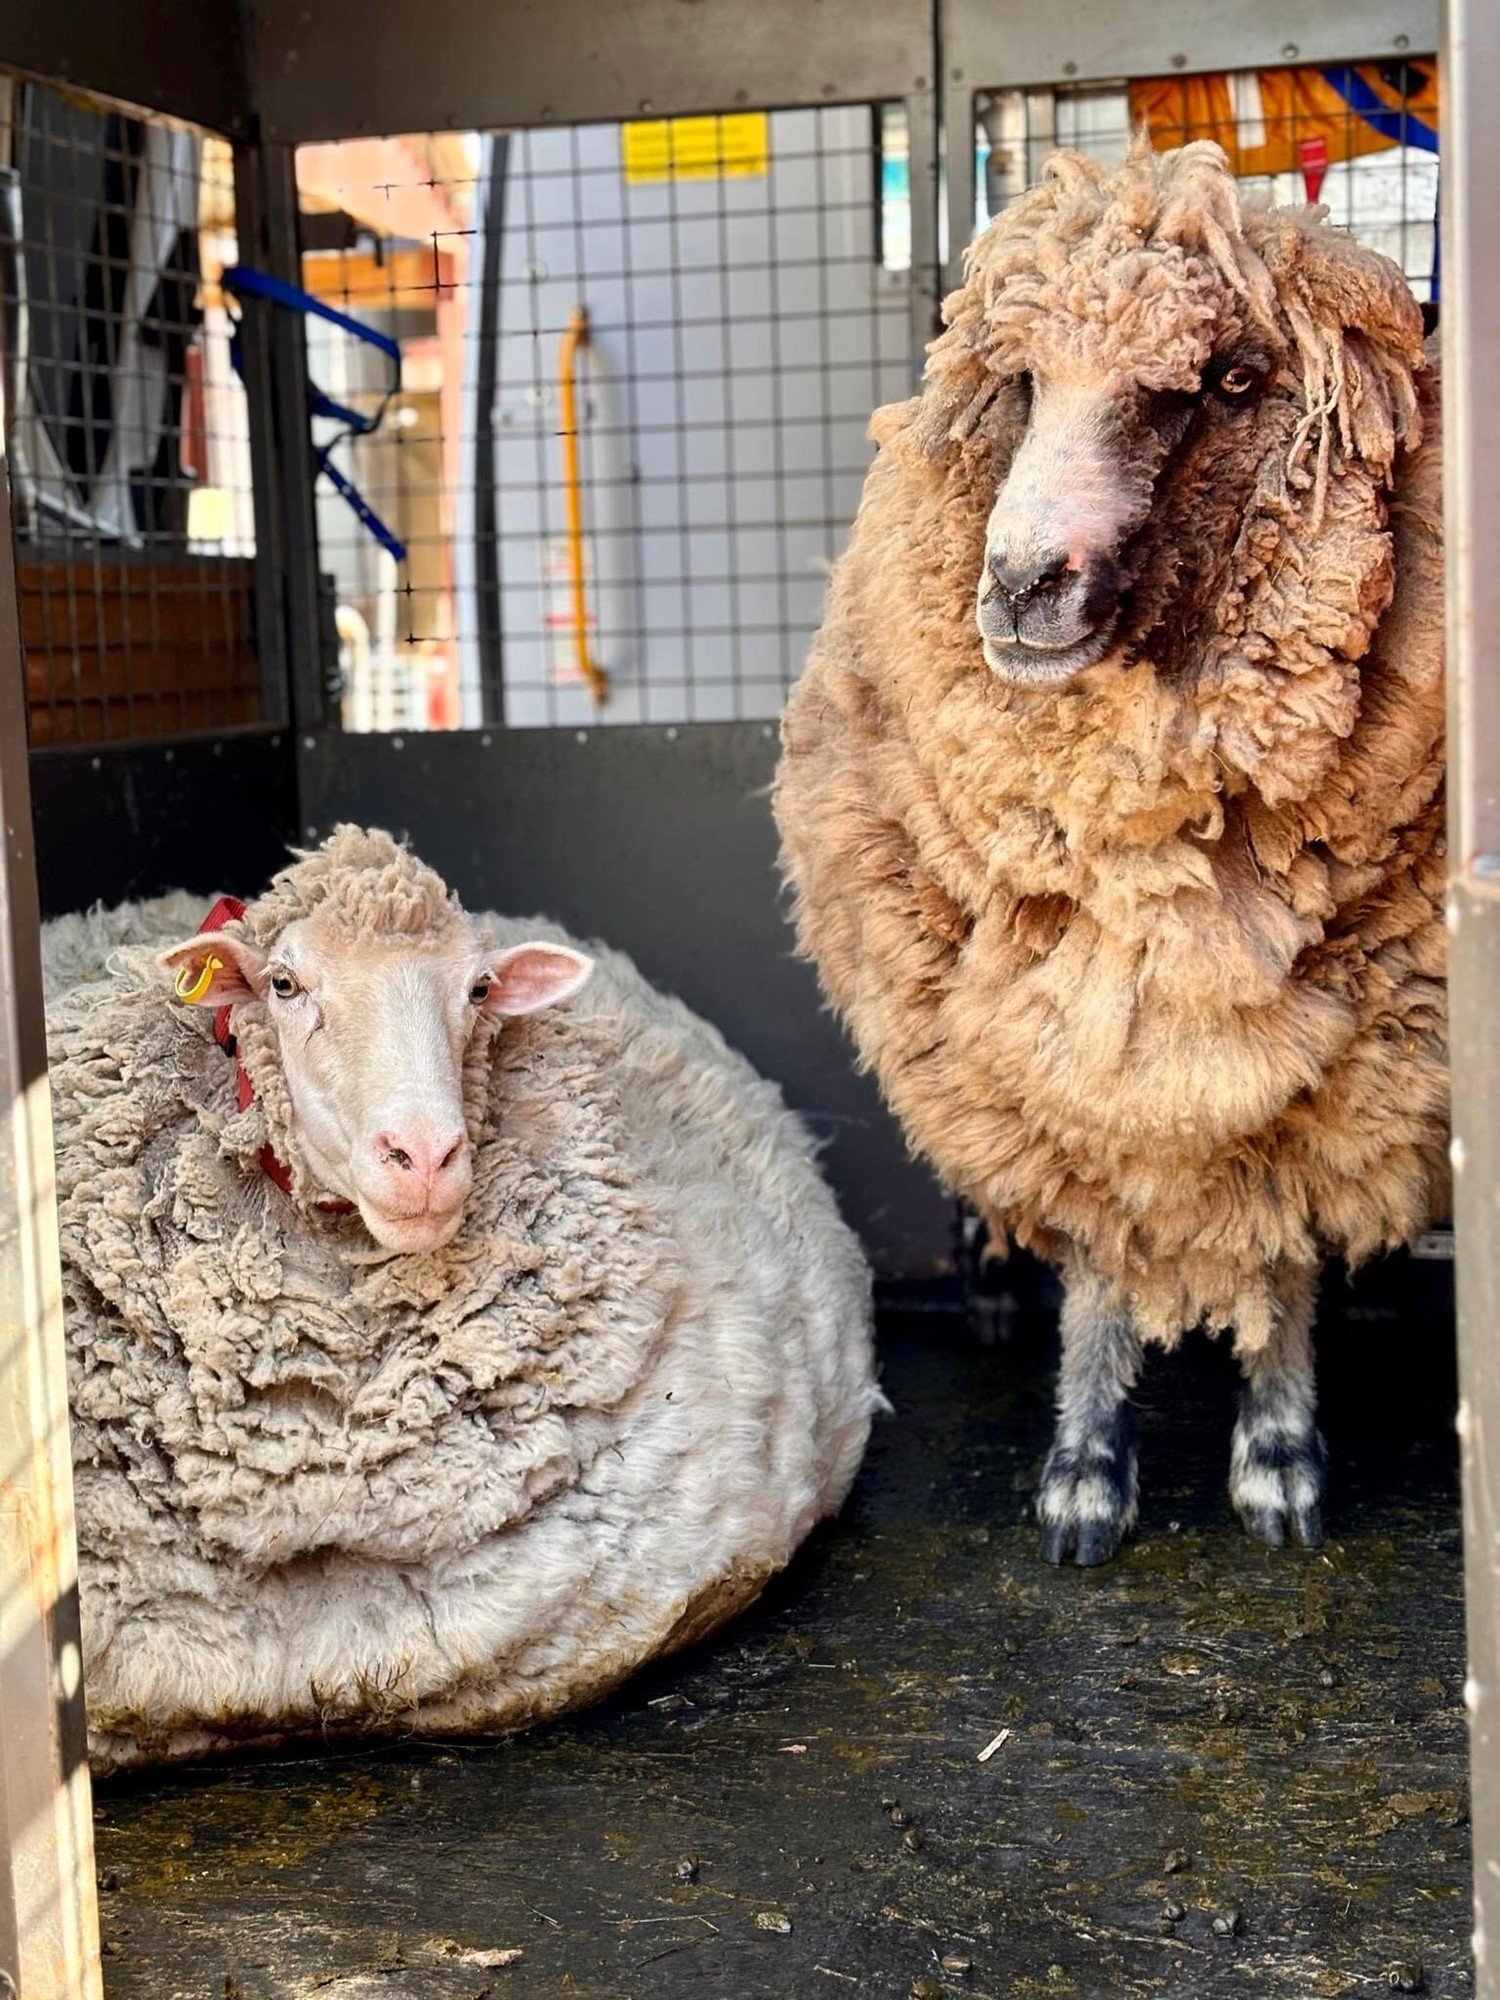 Two sheep in the back of a truck